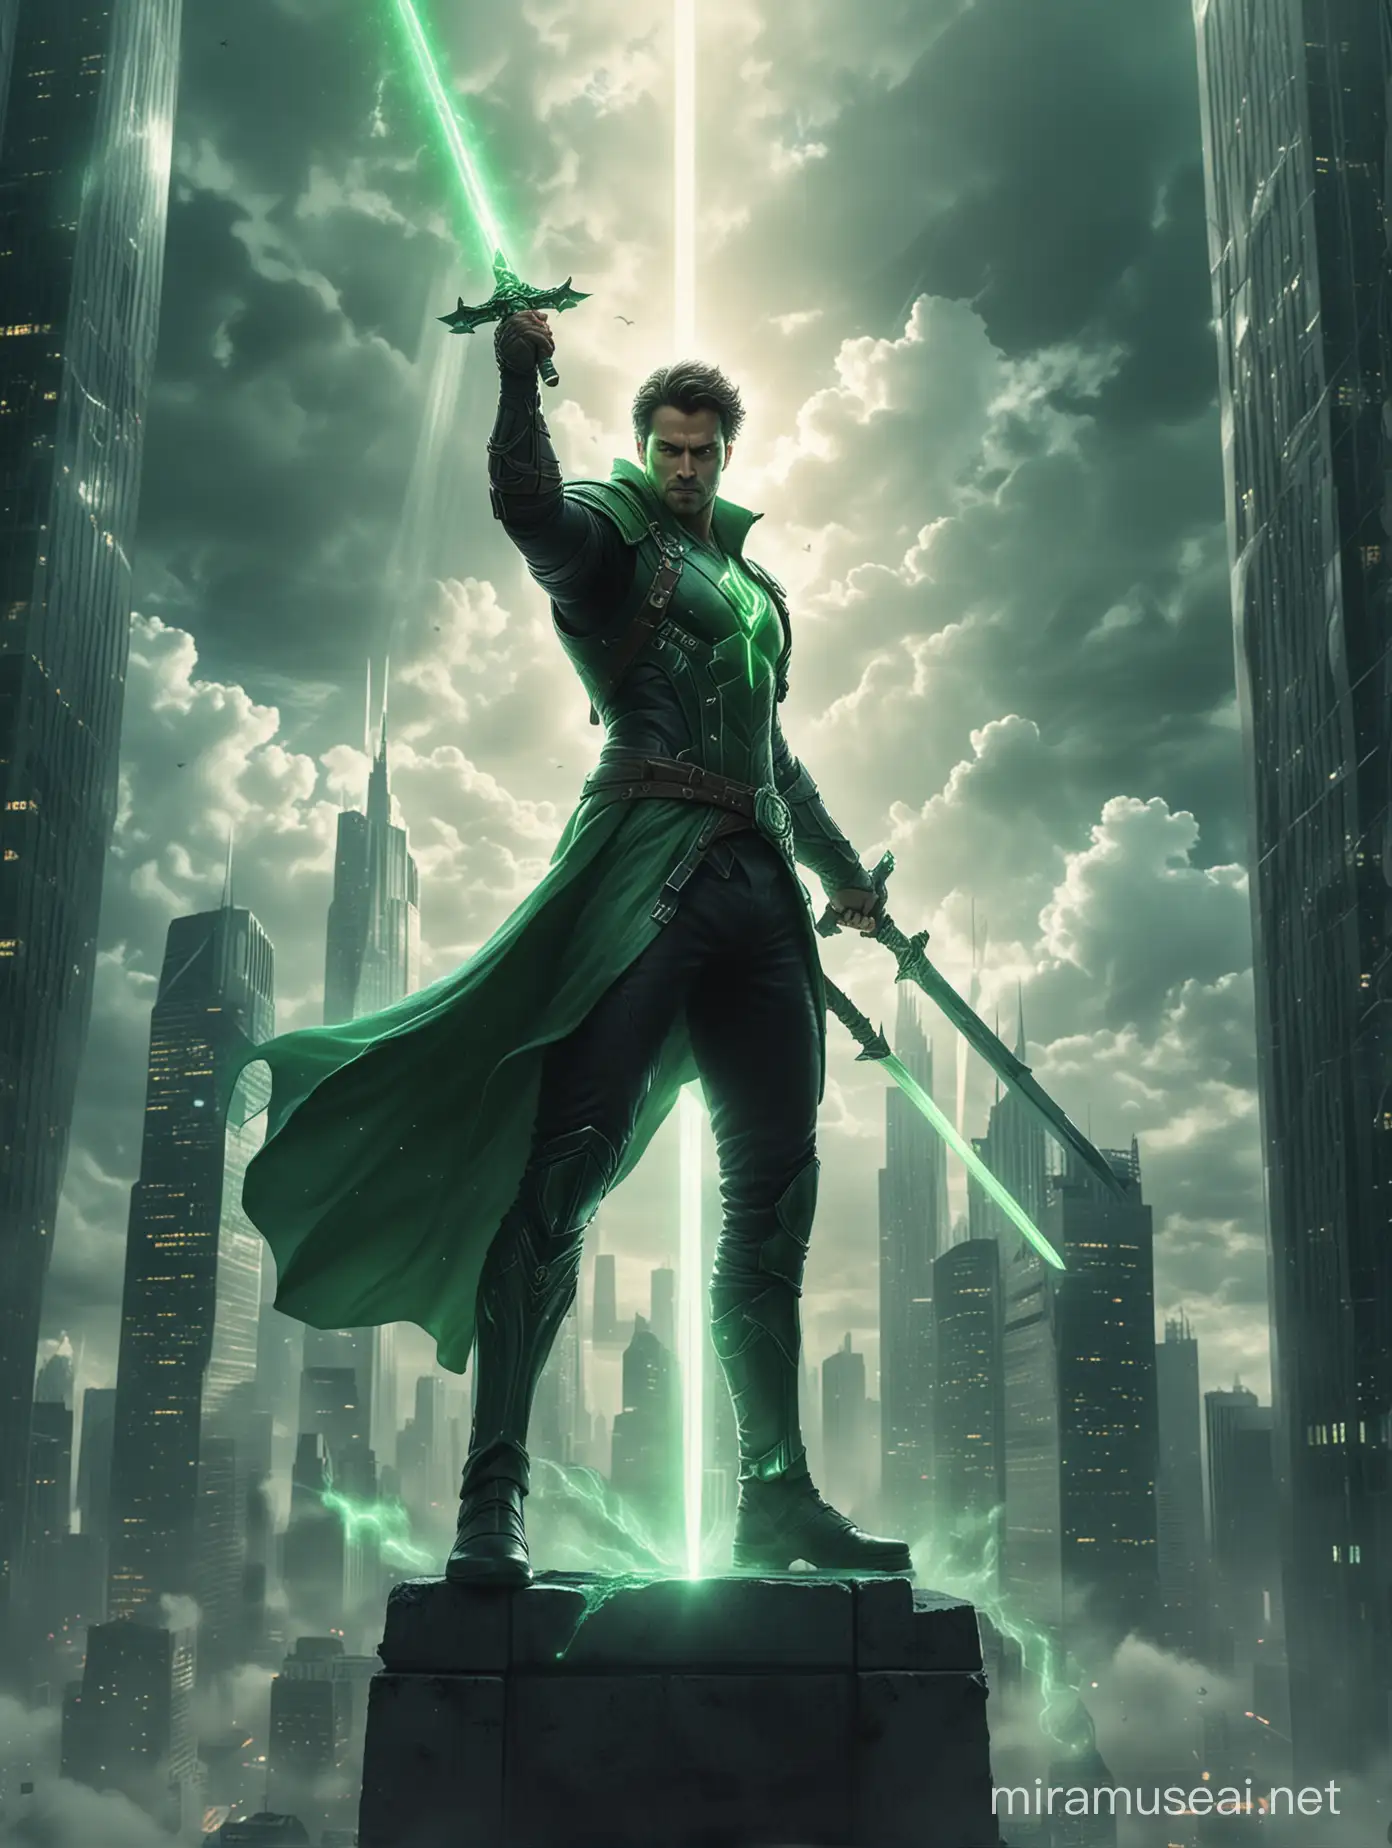 A handsome man standing on a skyscraper, with a powerful glowing sword in his hand and a giant green luminous being descending from the heavens to fight him